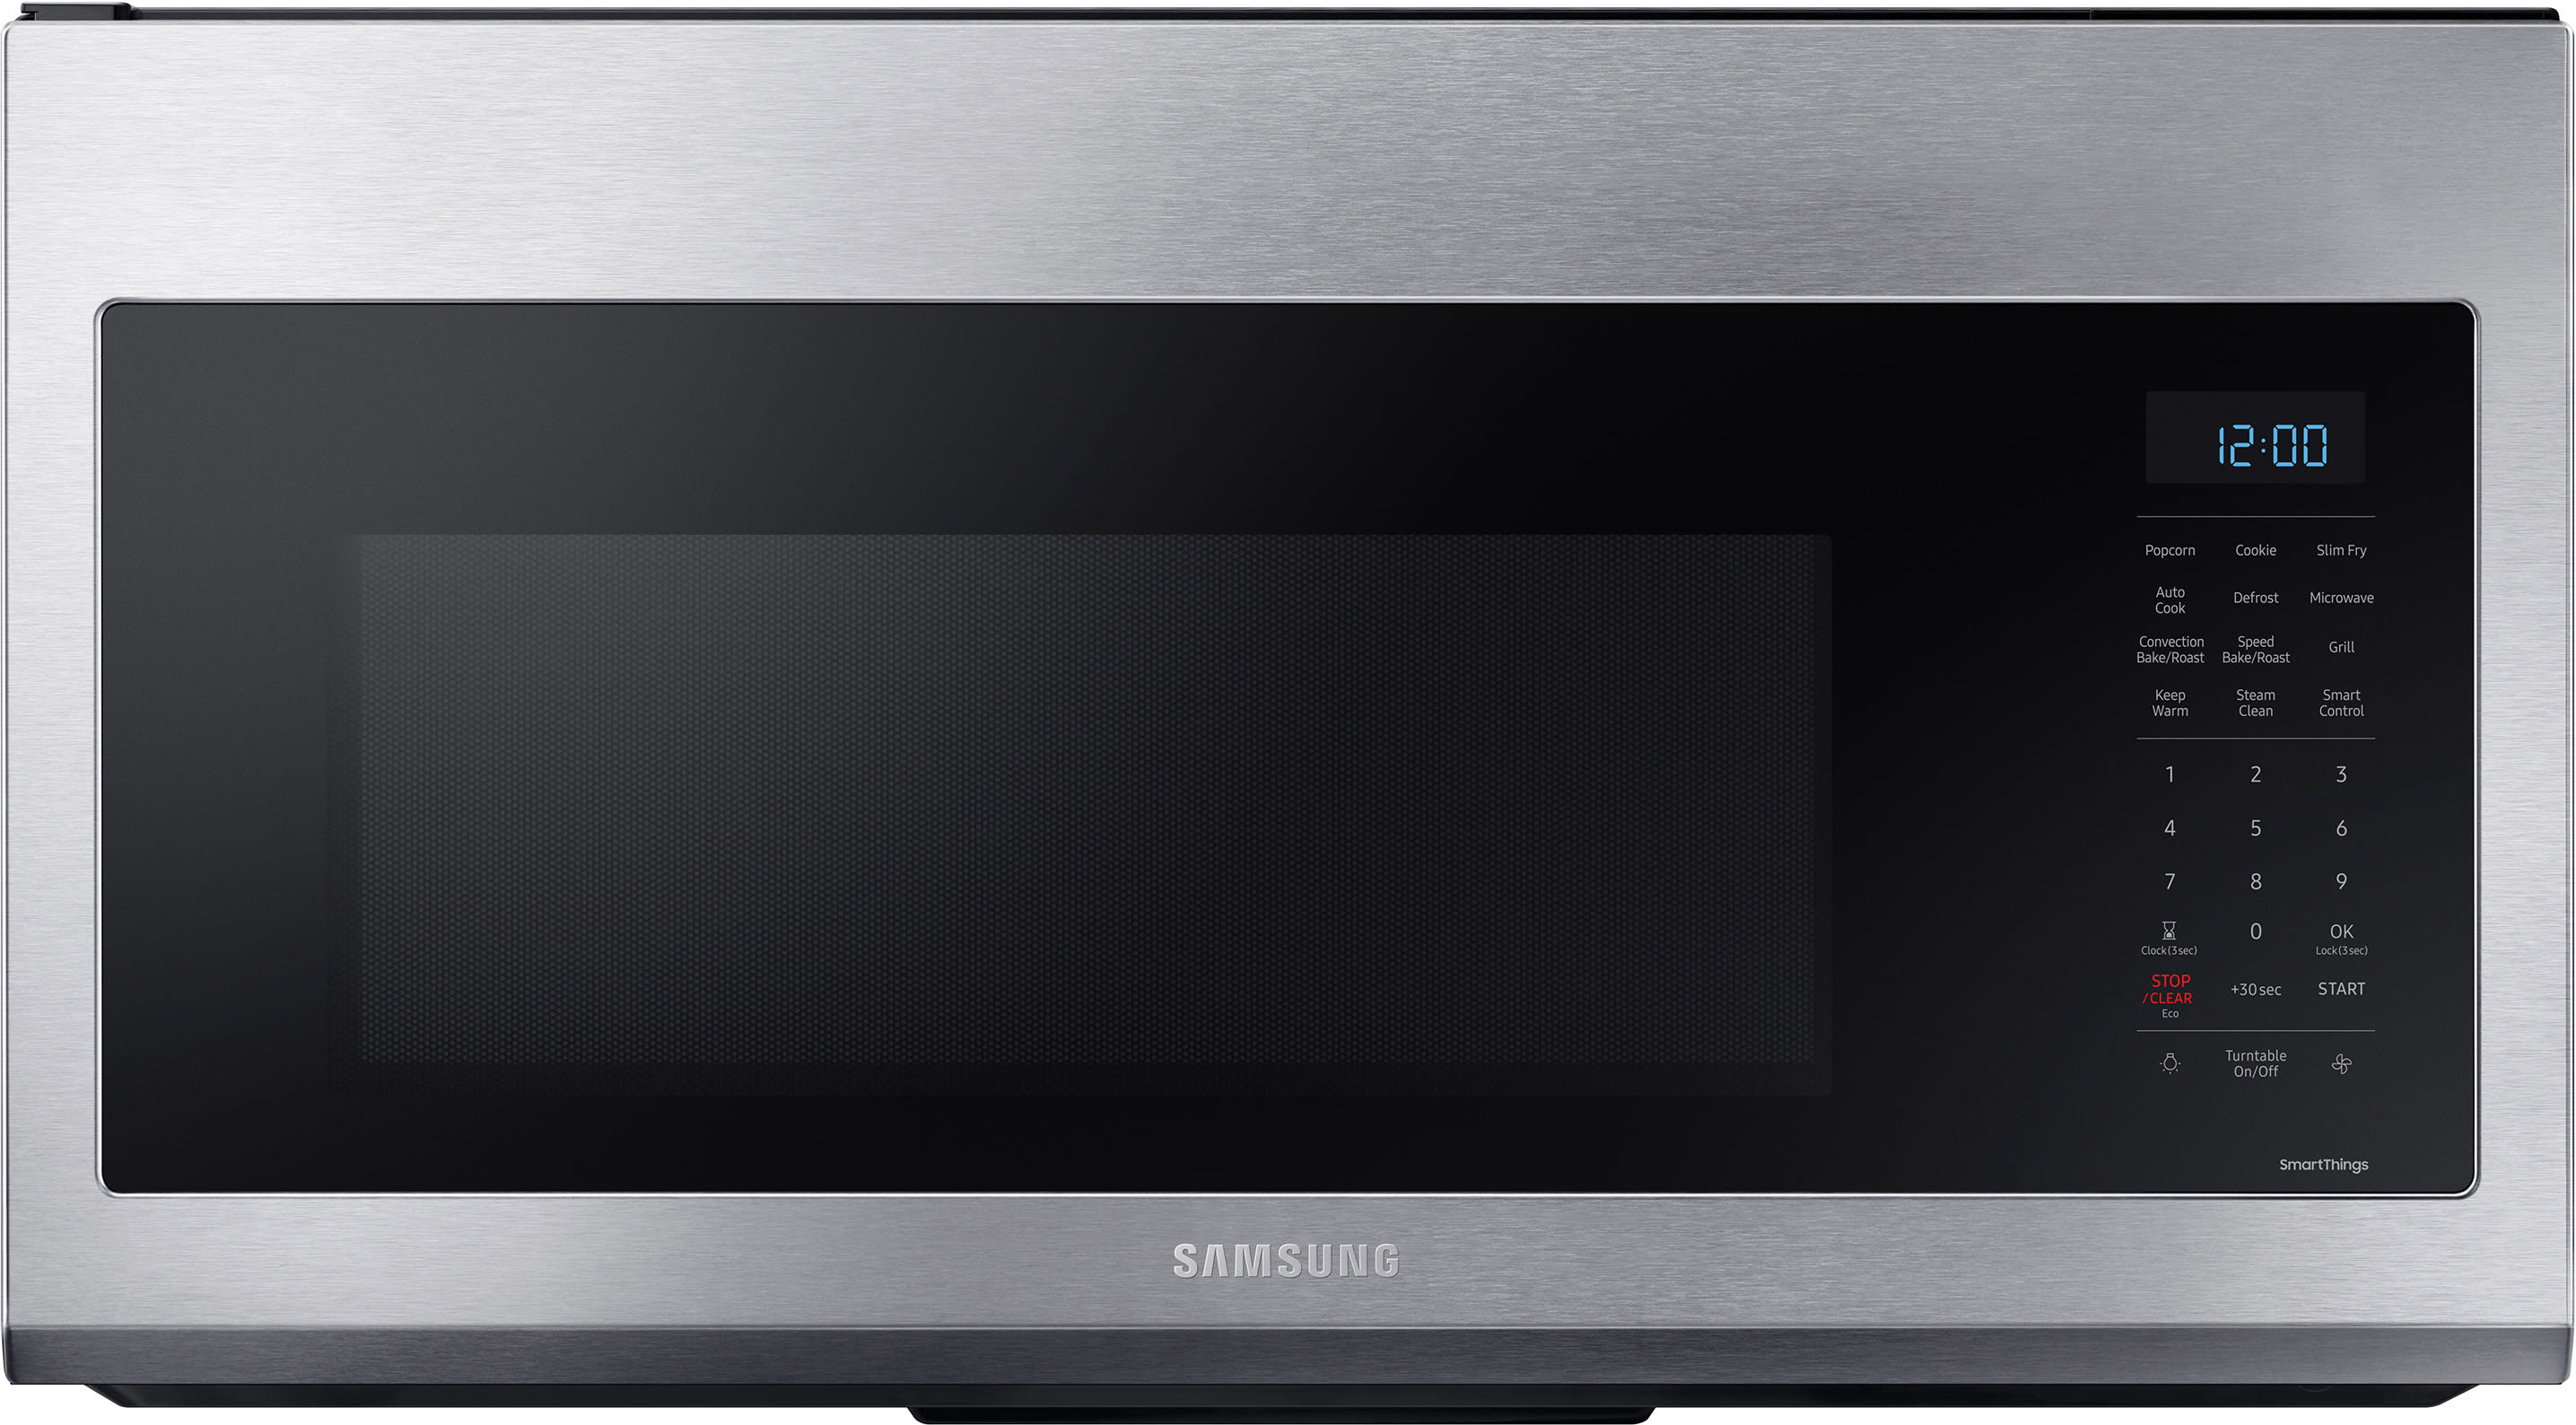 Samsung NX58T7511SS 30 Freestanding Gas Range - w/Air Fry Tray, Stainless  Steel